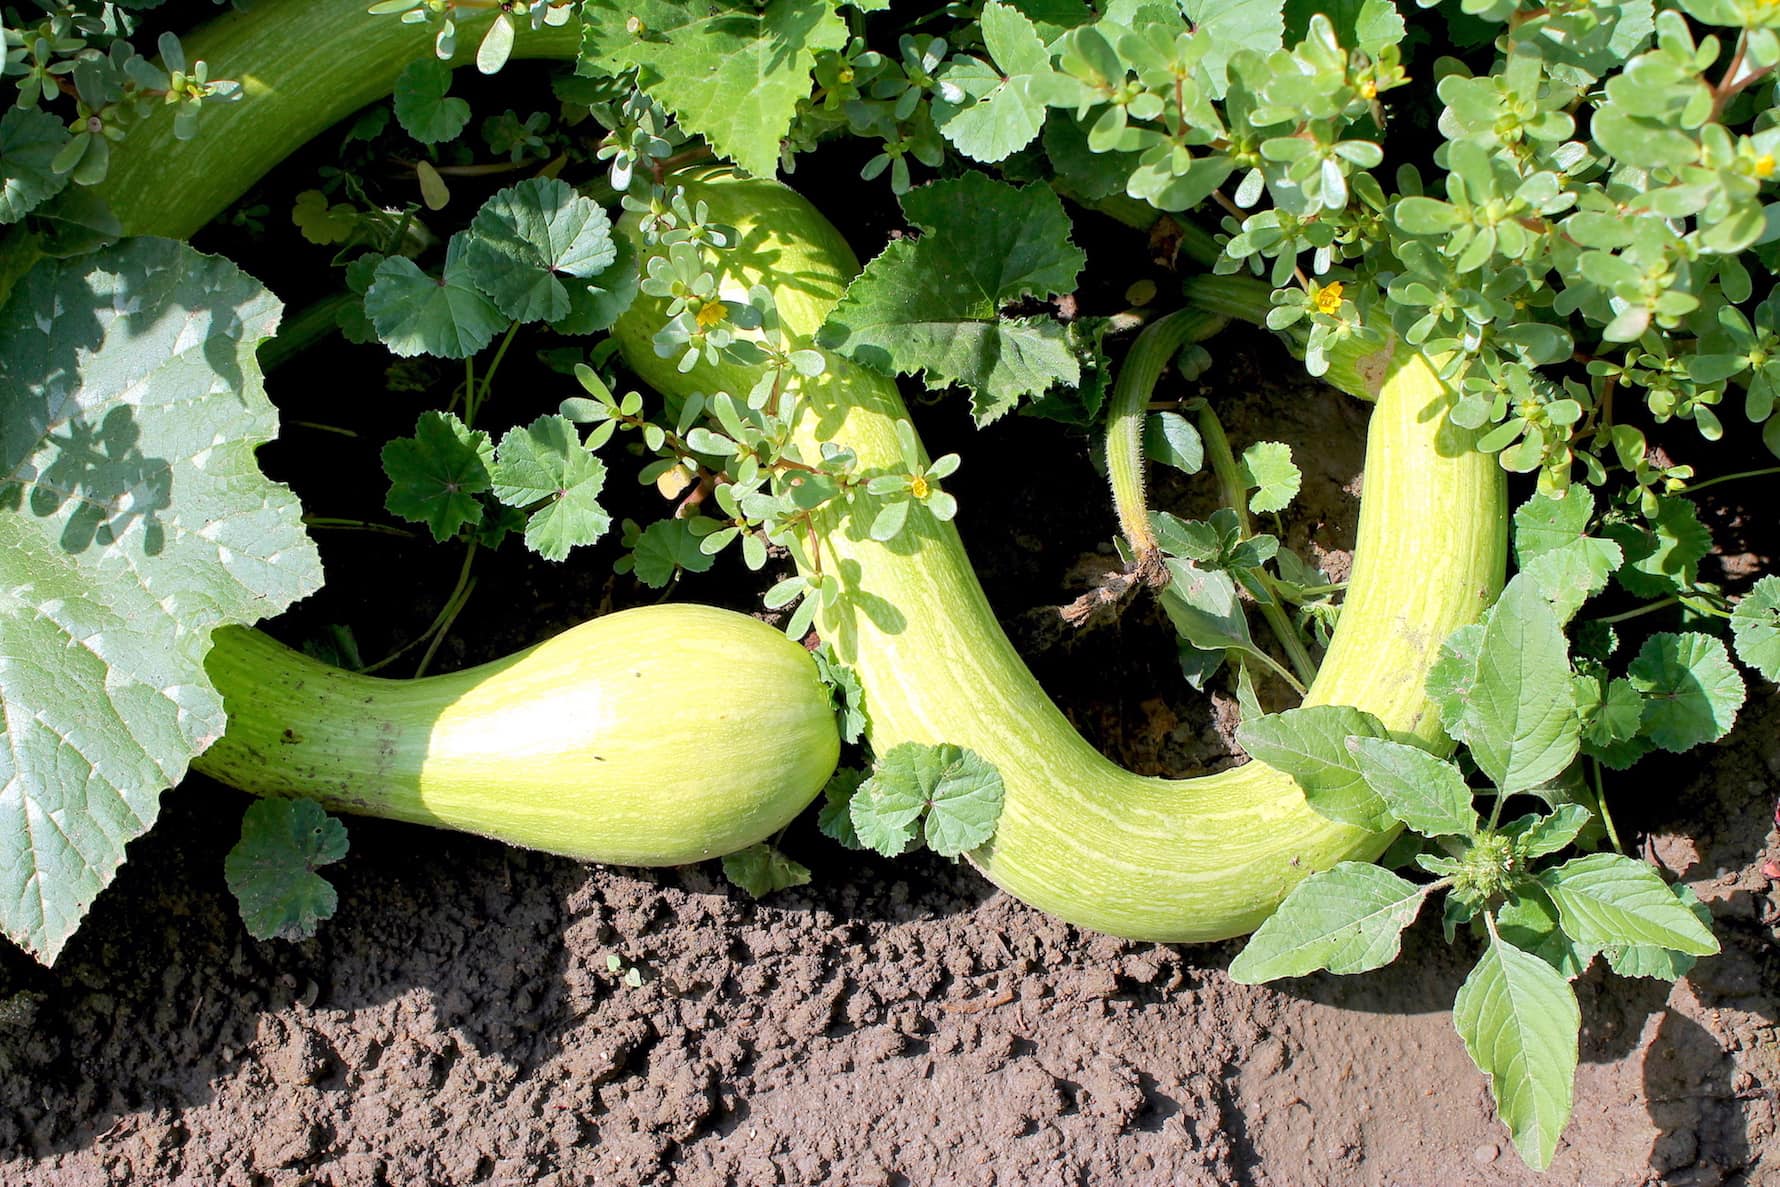 Tromboncino squash, almost ready for harvest.